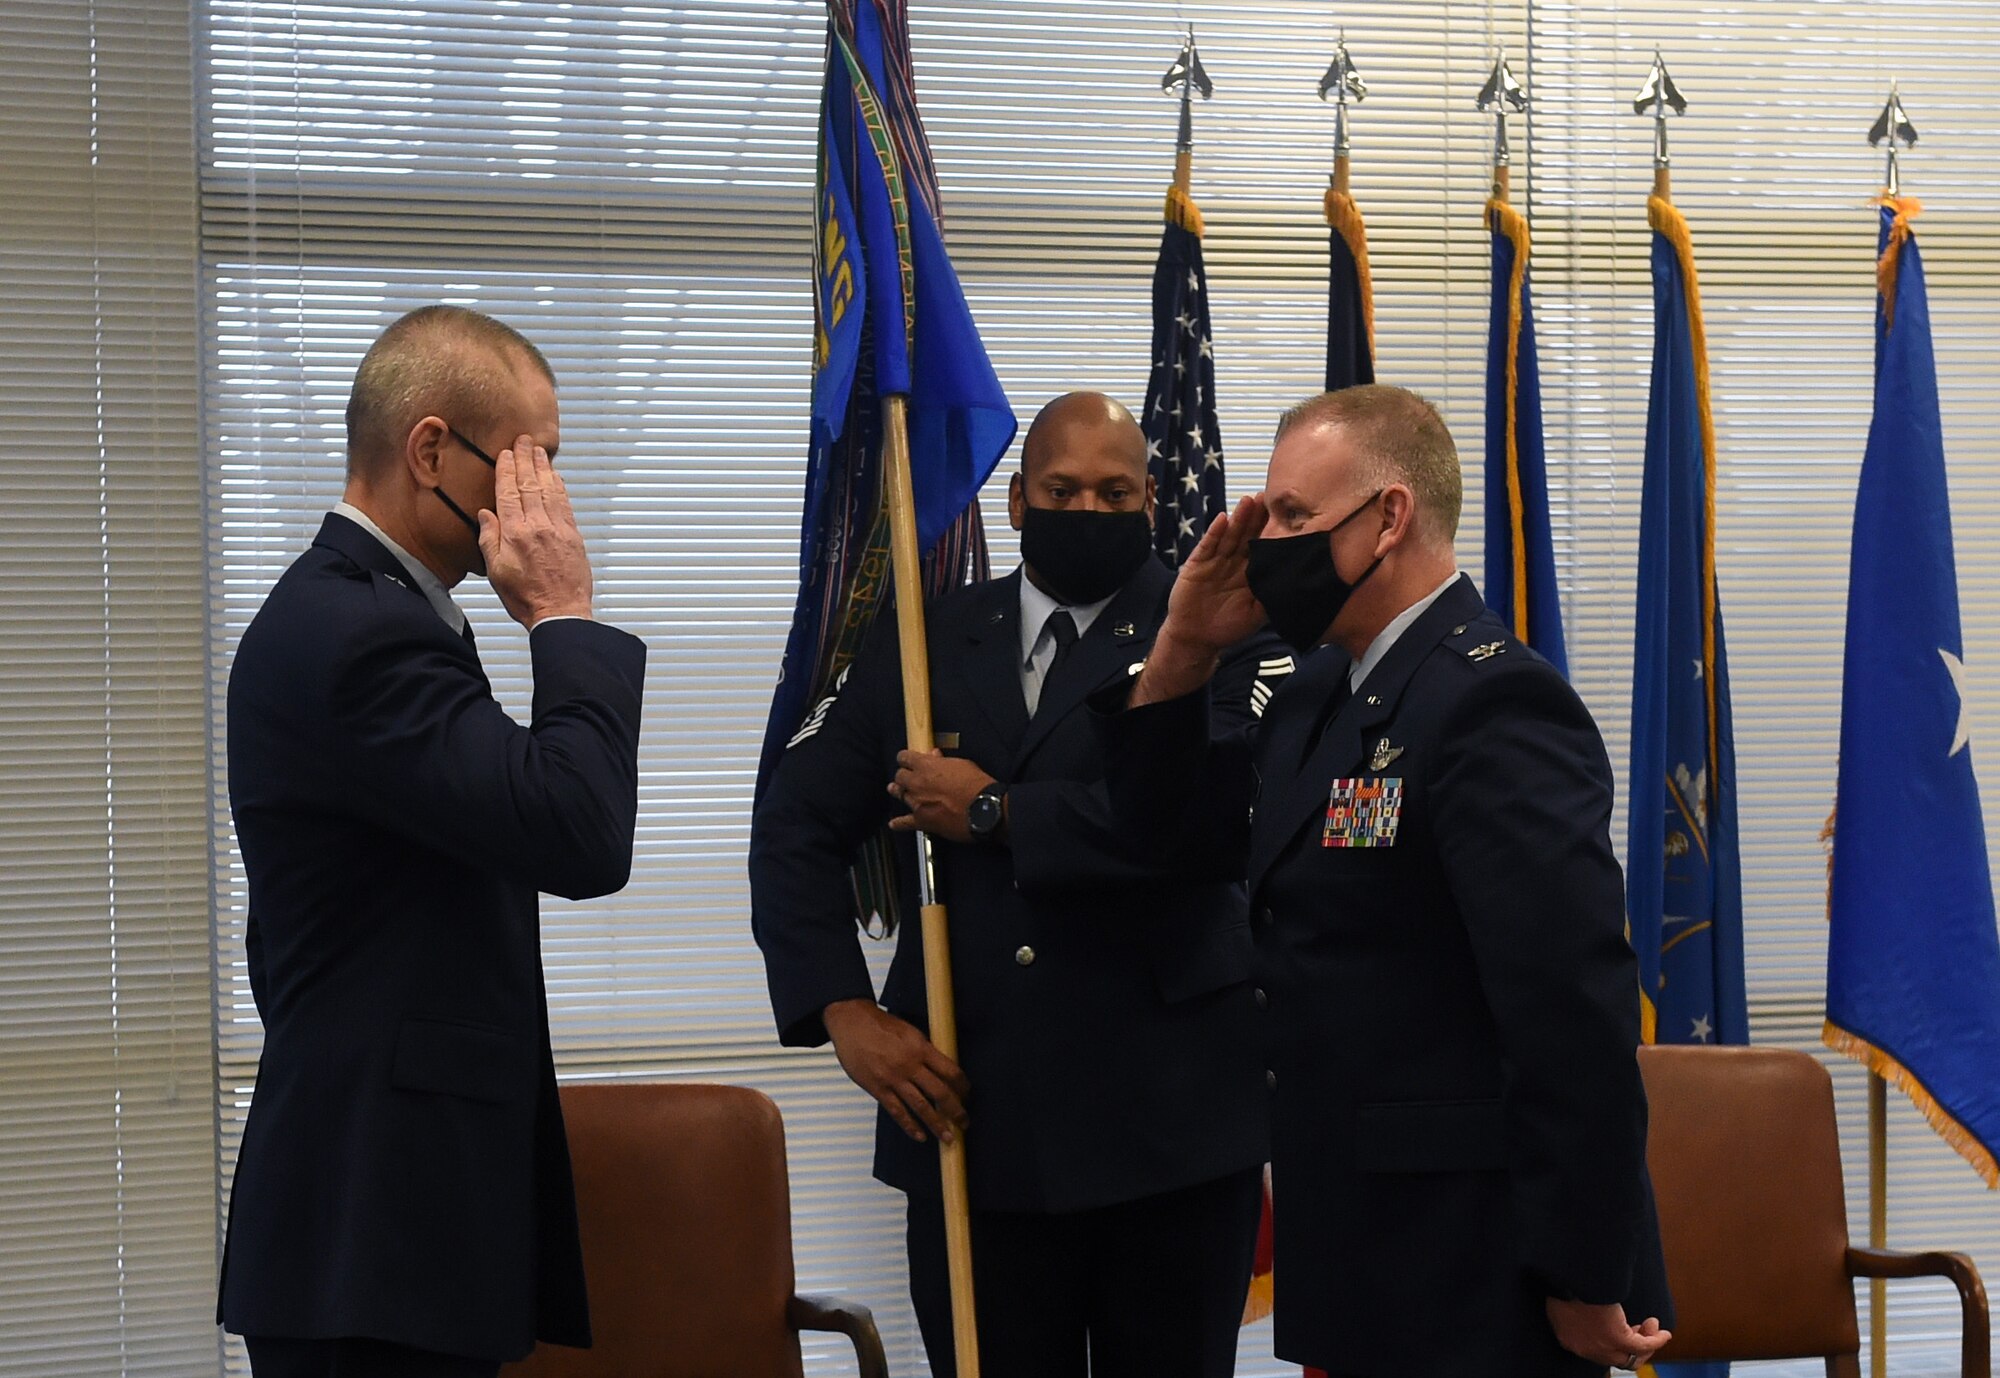 Gen. Shawn D. Ford (left) and Col. Travis J. Crawmer (right) pose for photos during the 132d Wing's Change of Command (CoC) Ceremony at the 132d Wing on January 9, 2021. Col. Mark A. Chidley relinquished command to Col. Crawmer, the CoC was presided over by Gen. Ford.